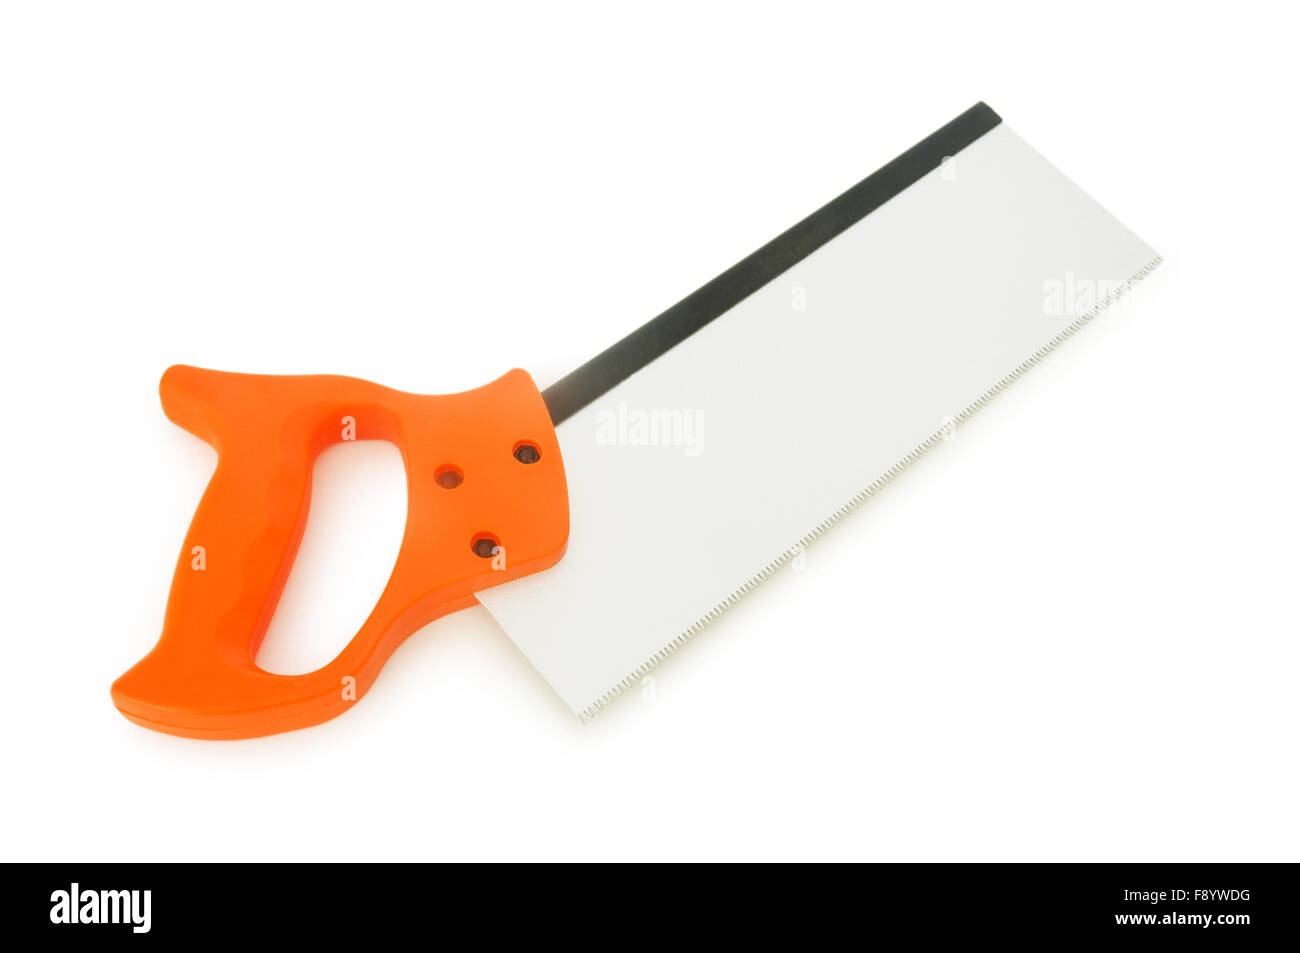 Hand saw isolated on the white background Stock Photo